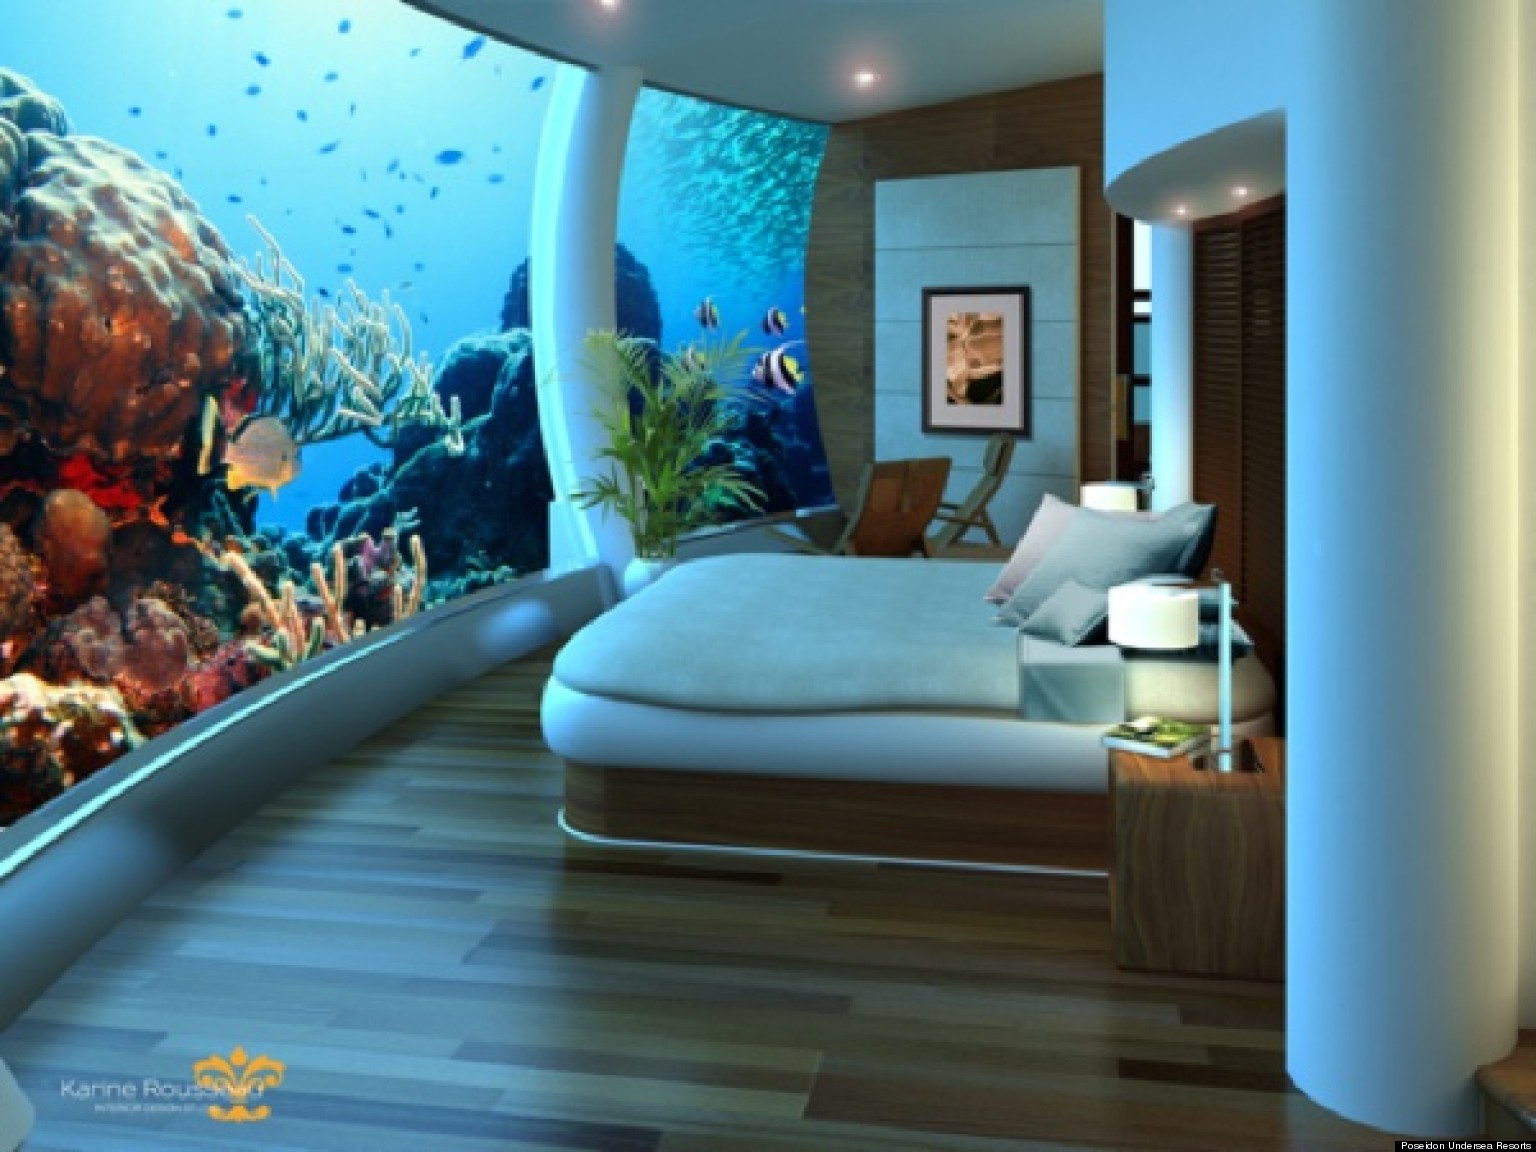 Underwater Hotels: Five Things You Need To Know (PHOTOS)